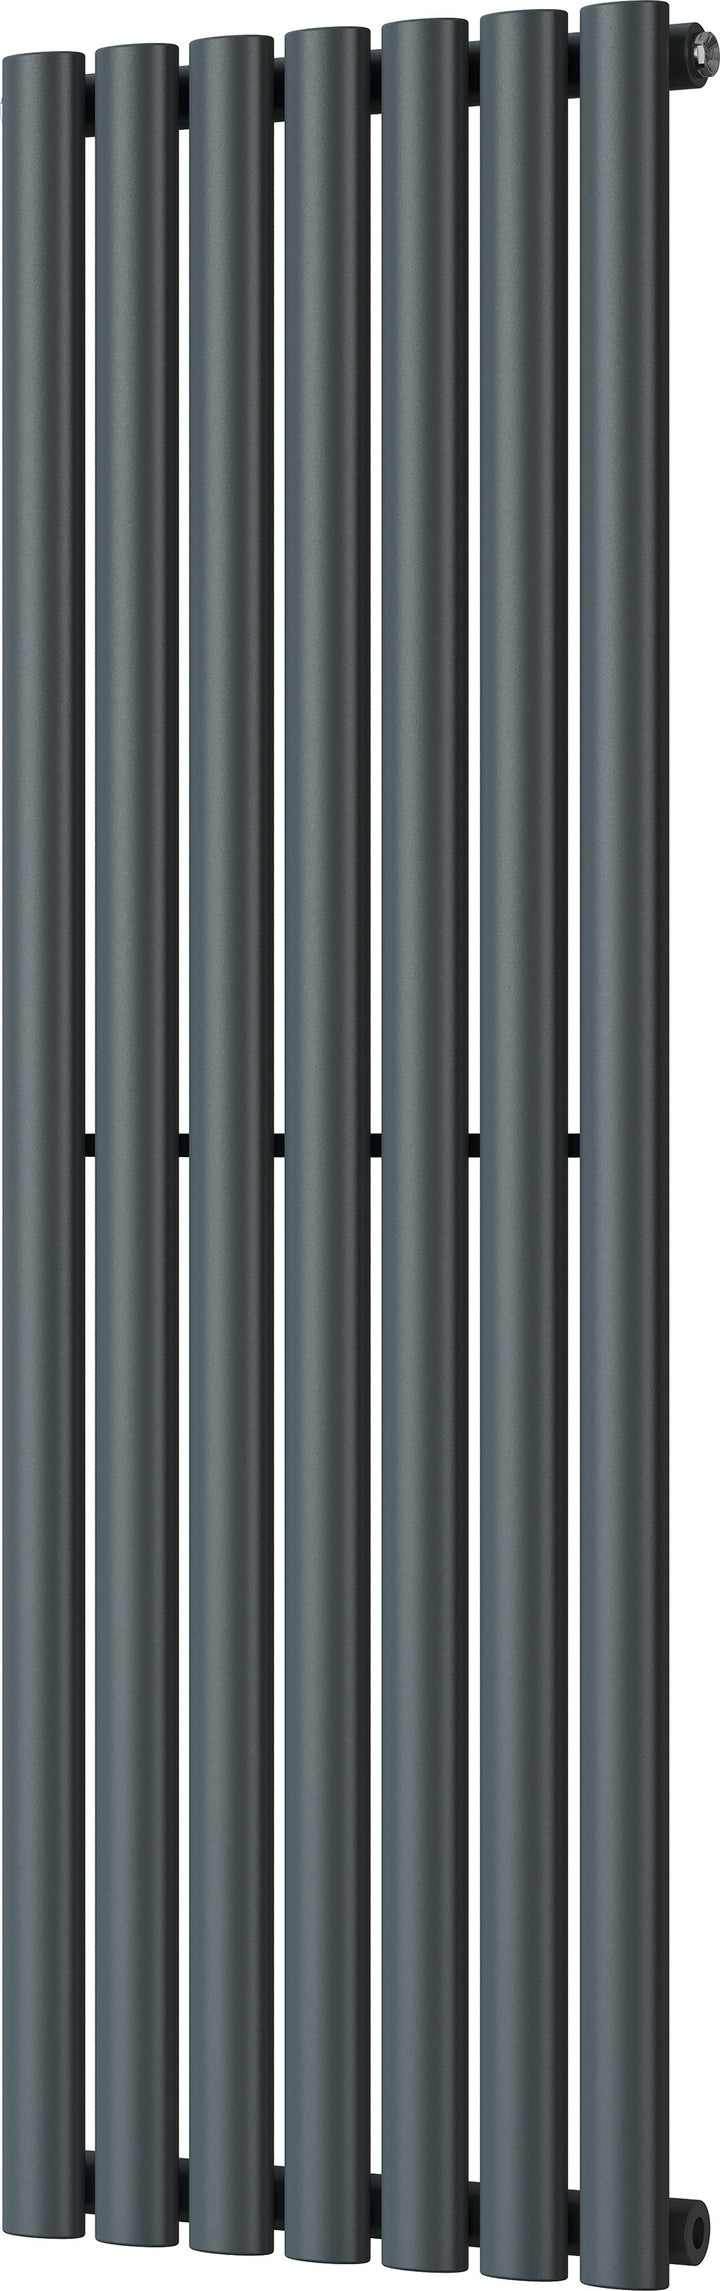 Omeara - Anthracite Vertical Radiator H1200mm x W406mm Single Panel